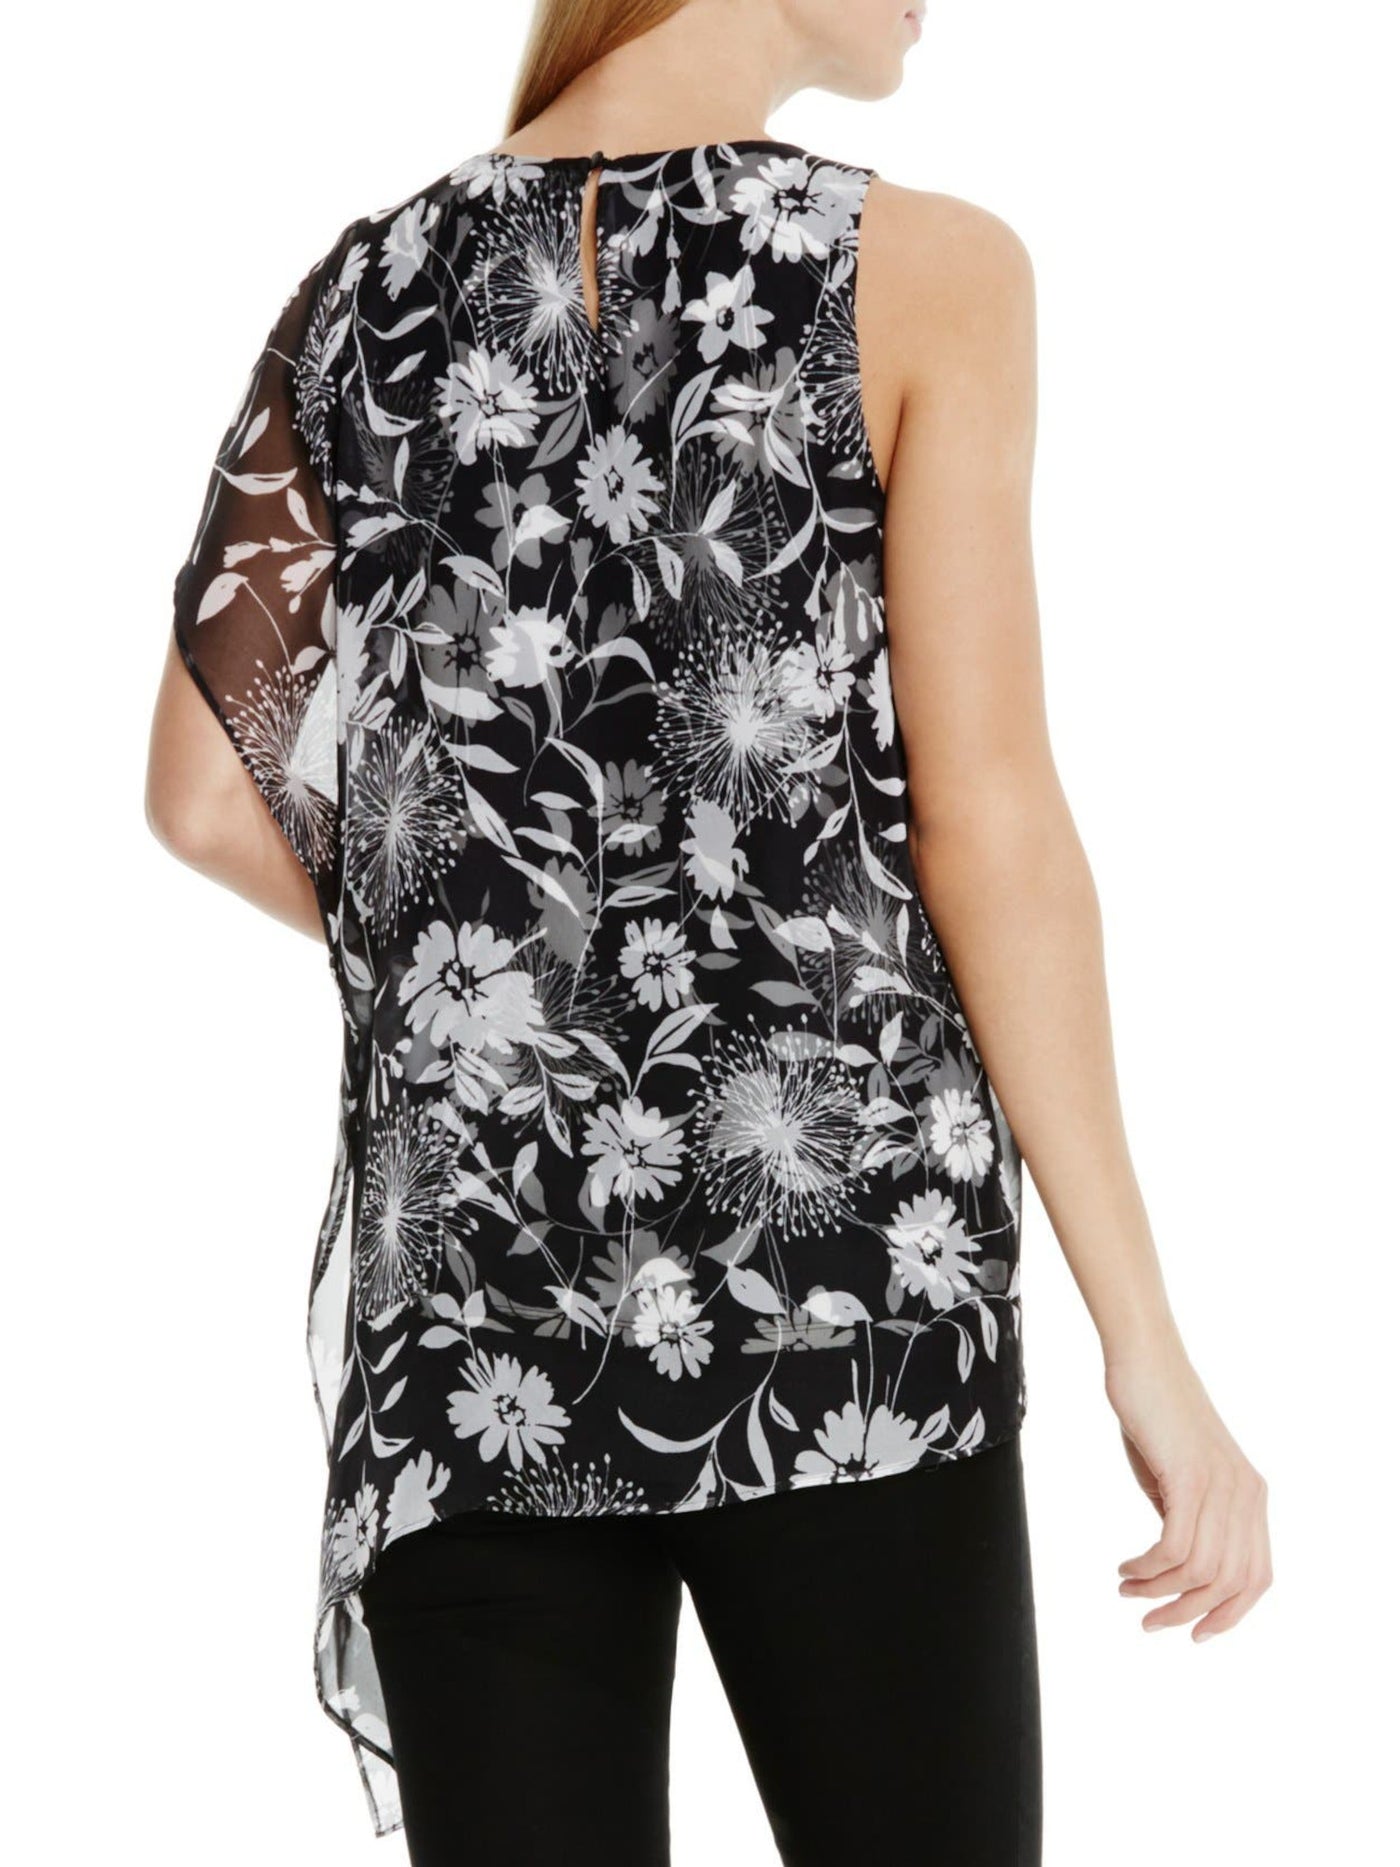 VINCE CAMUTO Womens Black Floral Sleeveless Jewel Neck Top XL